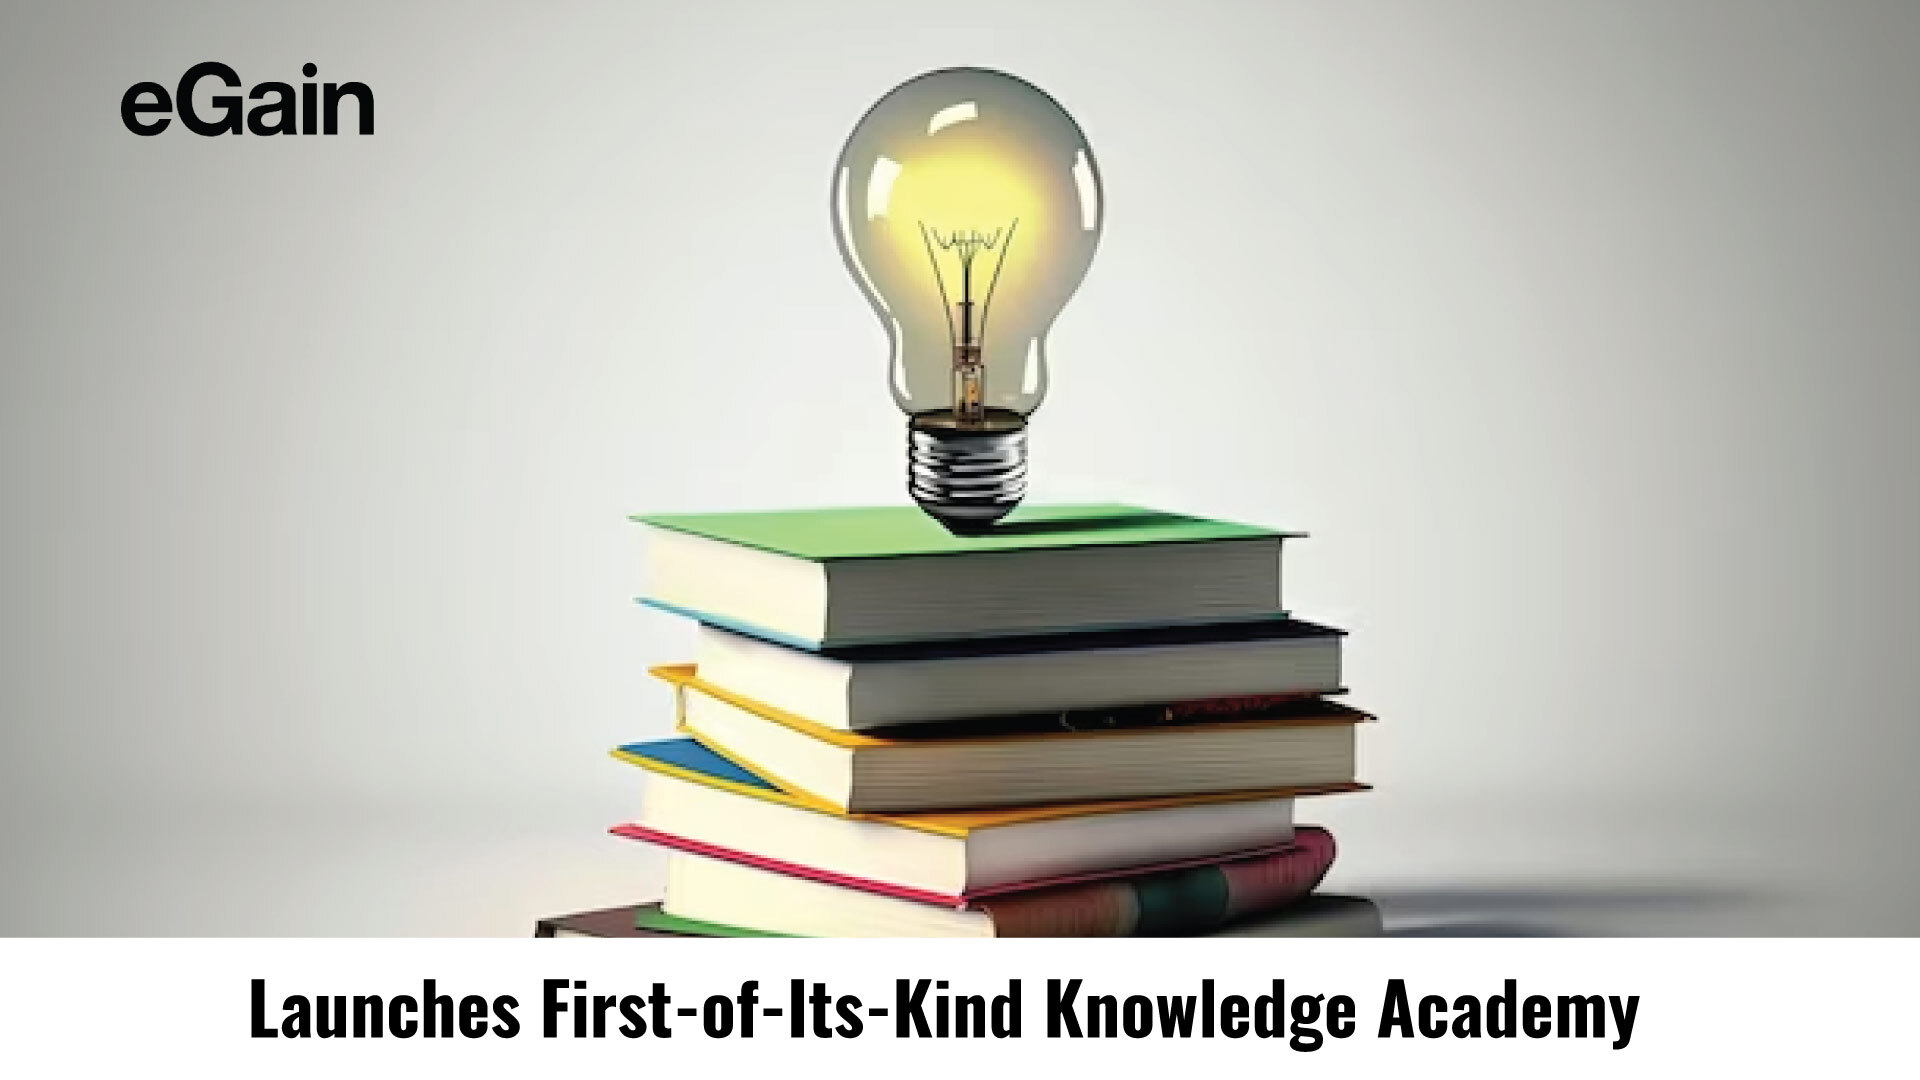 eGain Launches First-of-Its-Kind Knowledge Academy to Create Global Community of Modern Knowledge Management Practitioners